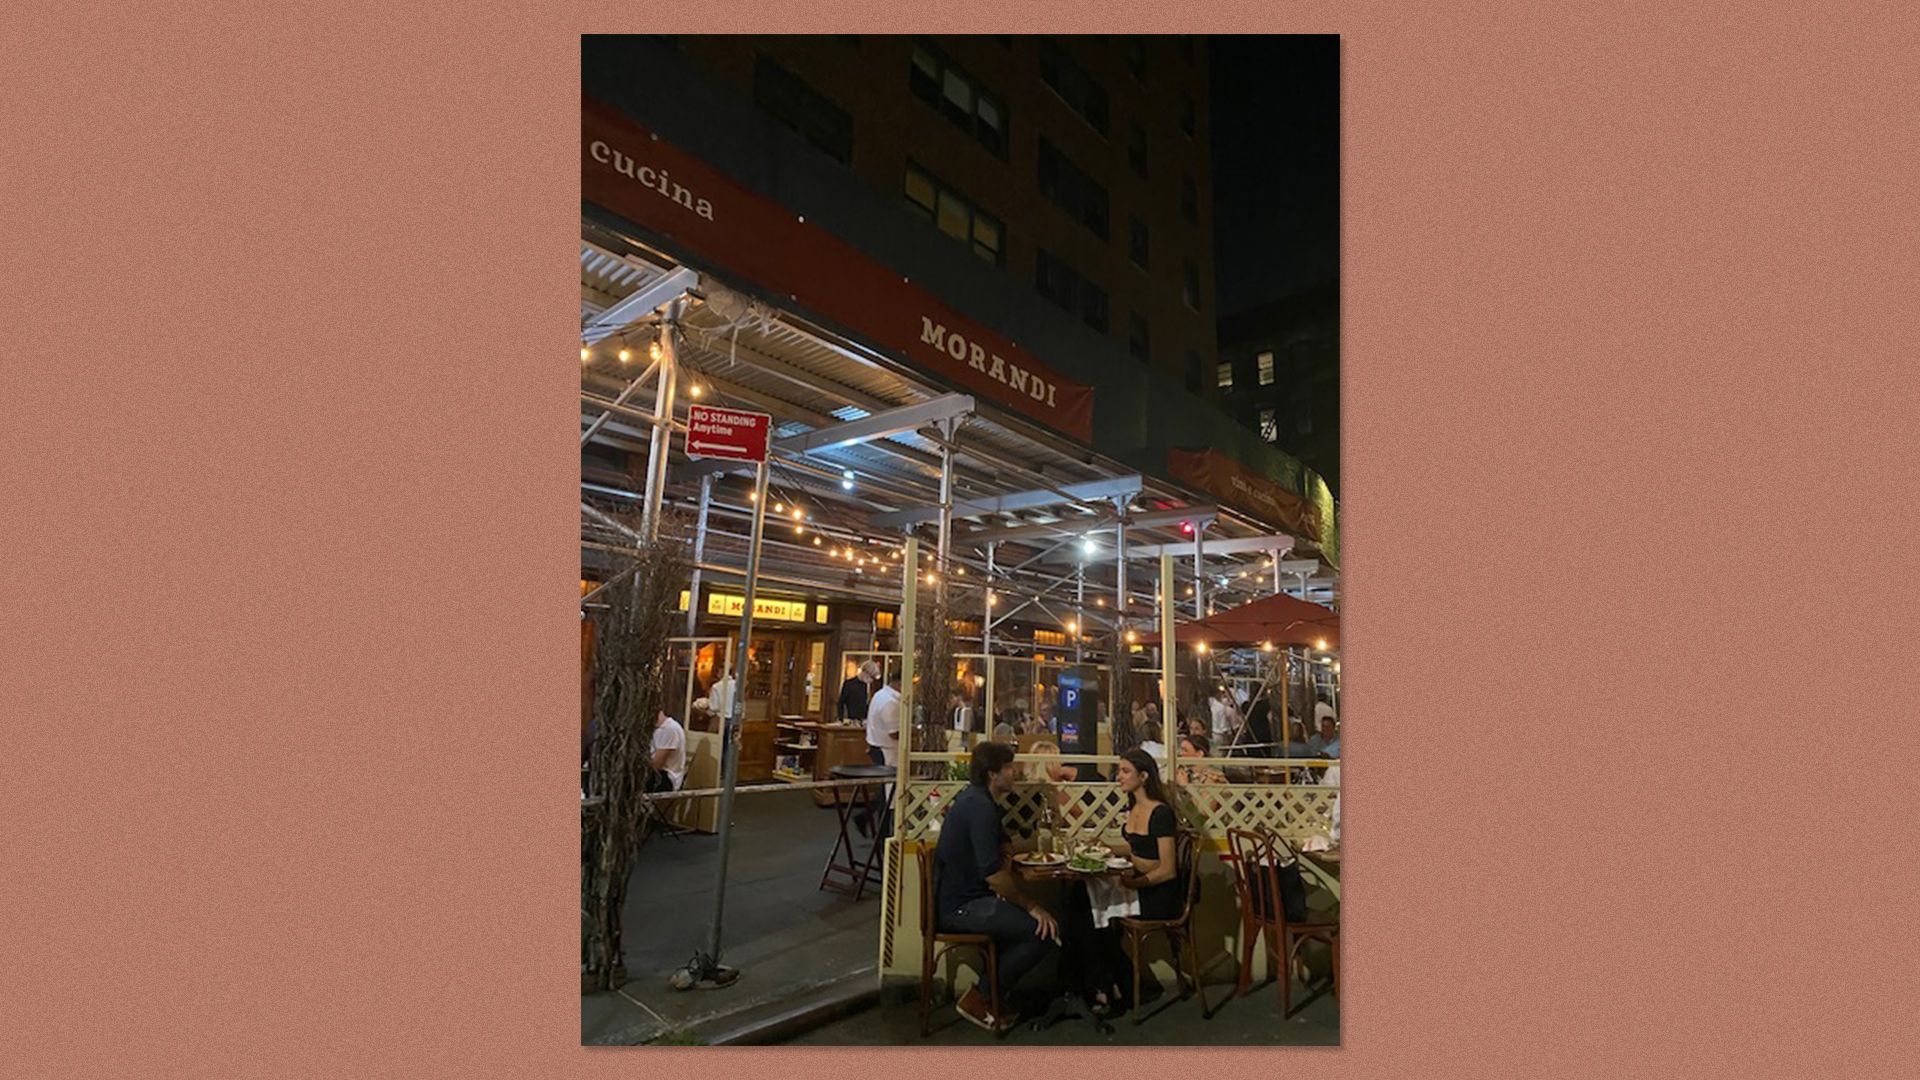 Outdoor dining at a restaurant in New York City, where proof of vaccination is required for all patrons.